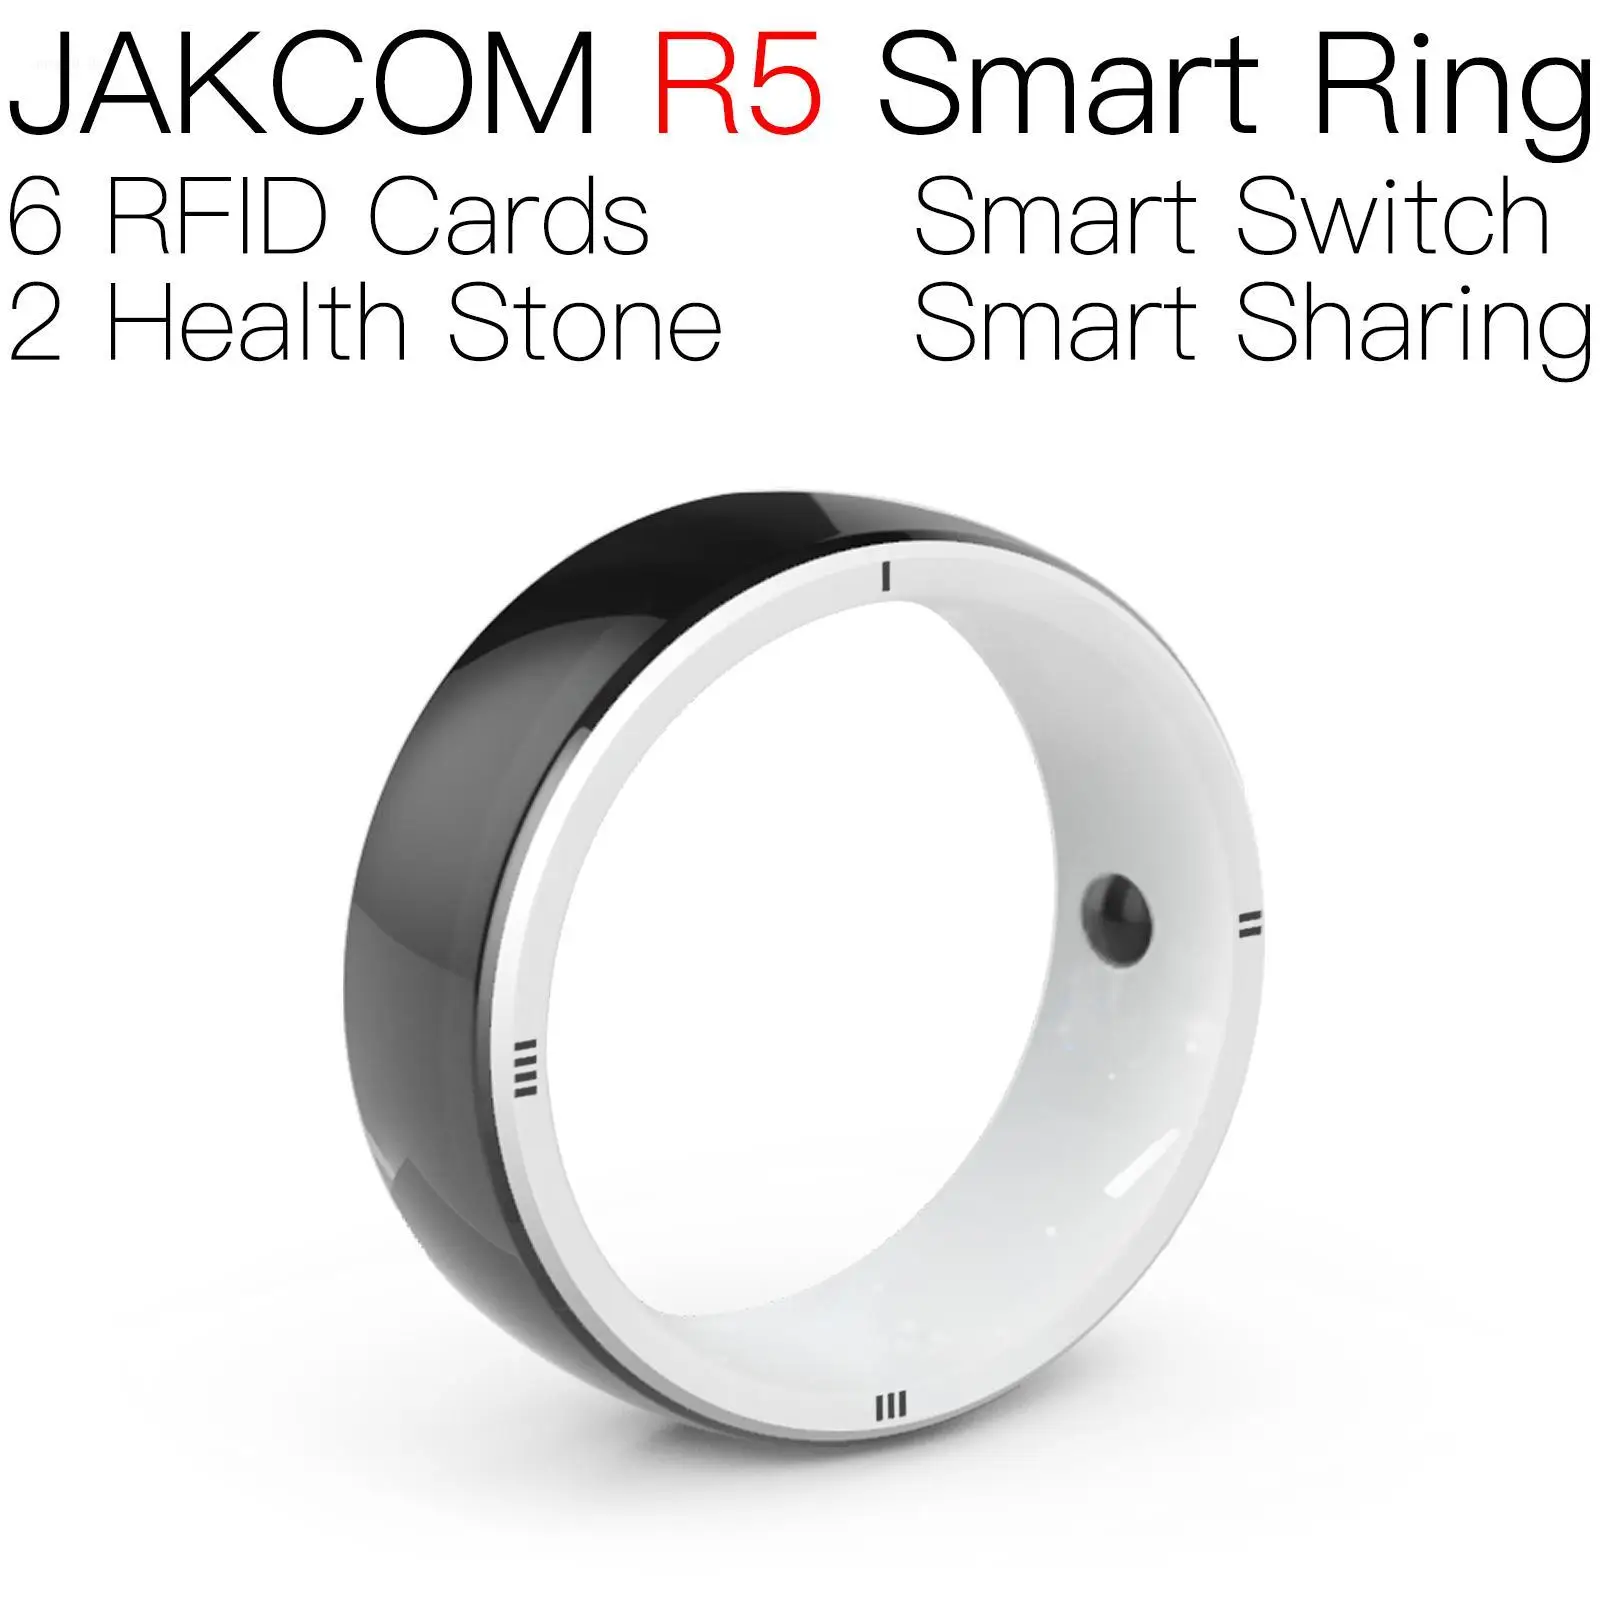 

JAKCOM R5 Smart Ring Super value as smart watch control para android hw28 homekit accessories spain smartwatch for